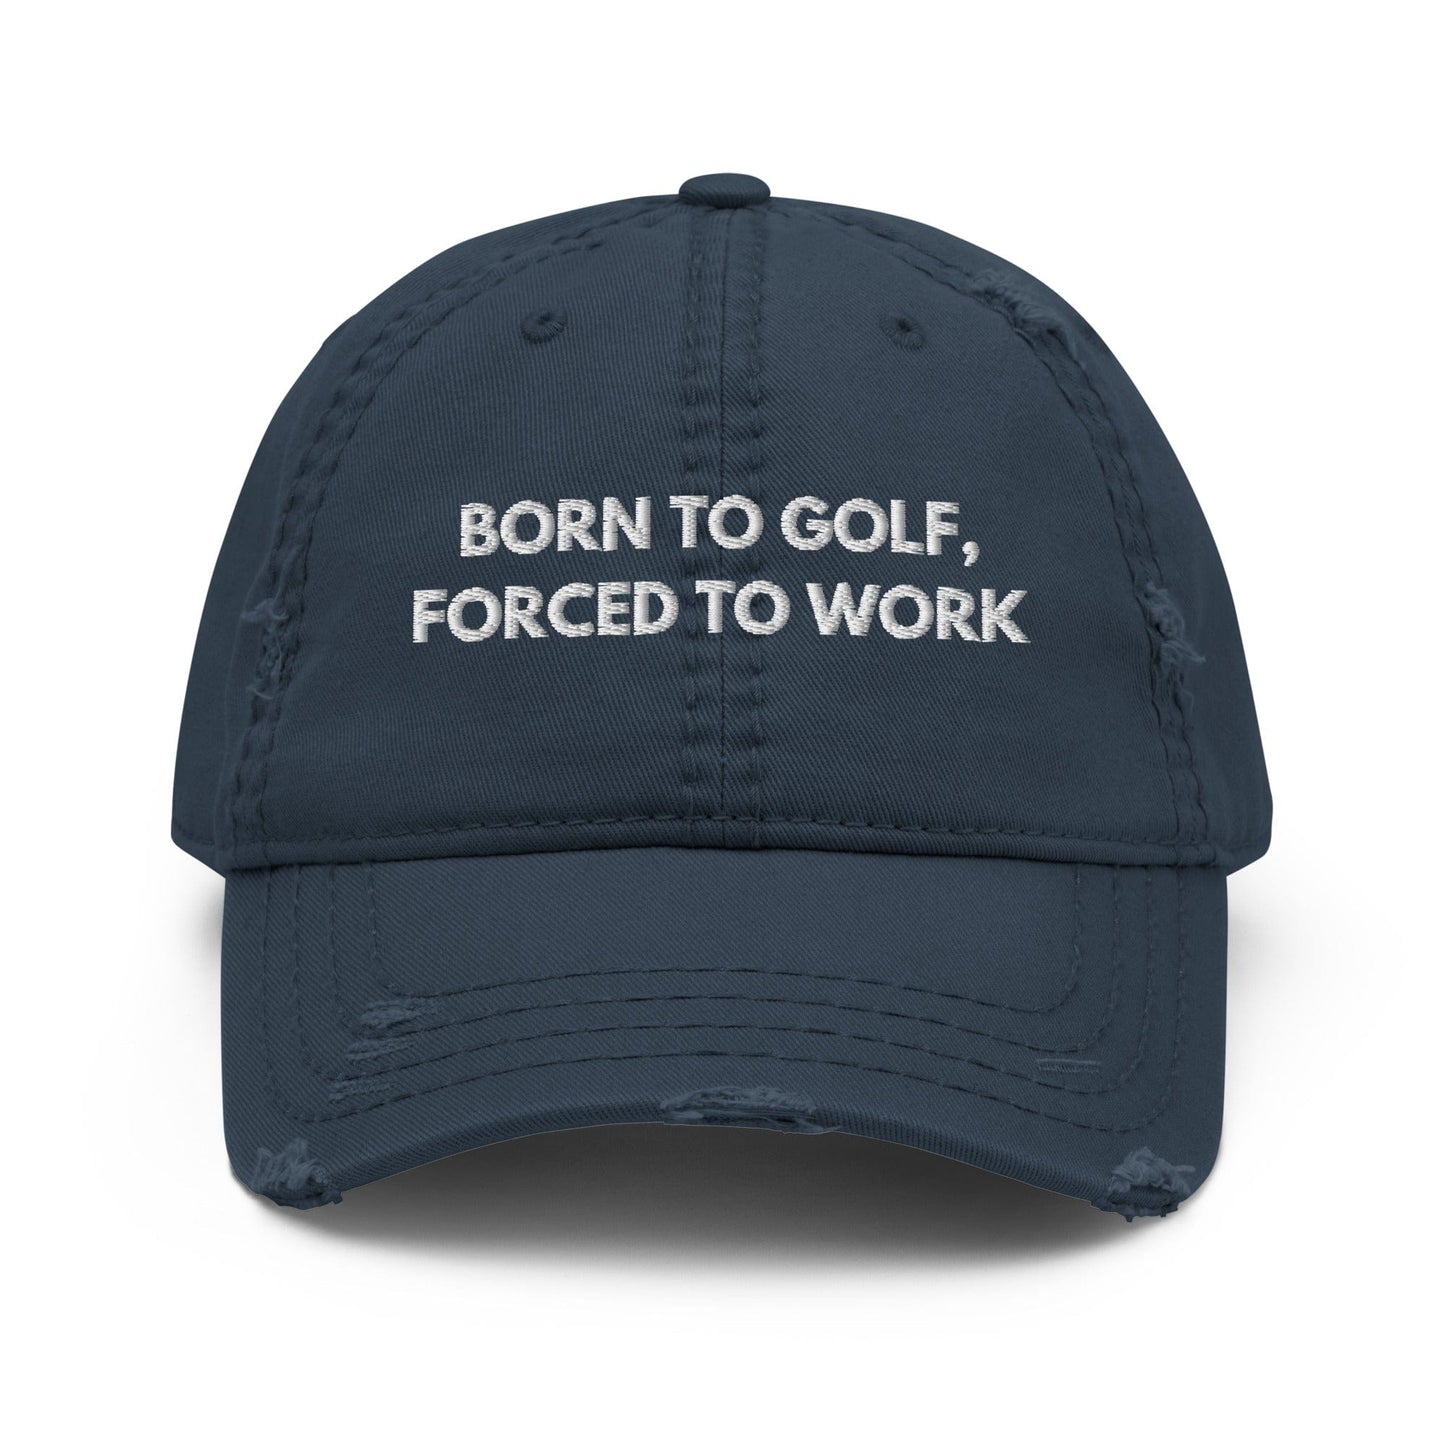 Funny Golfer Gifts  Distressed Cap Navy Born to Golf, Forced To Work Hat Distressed Hat